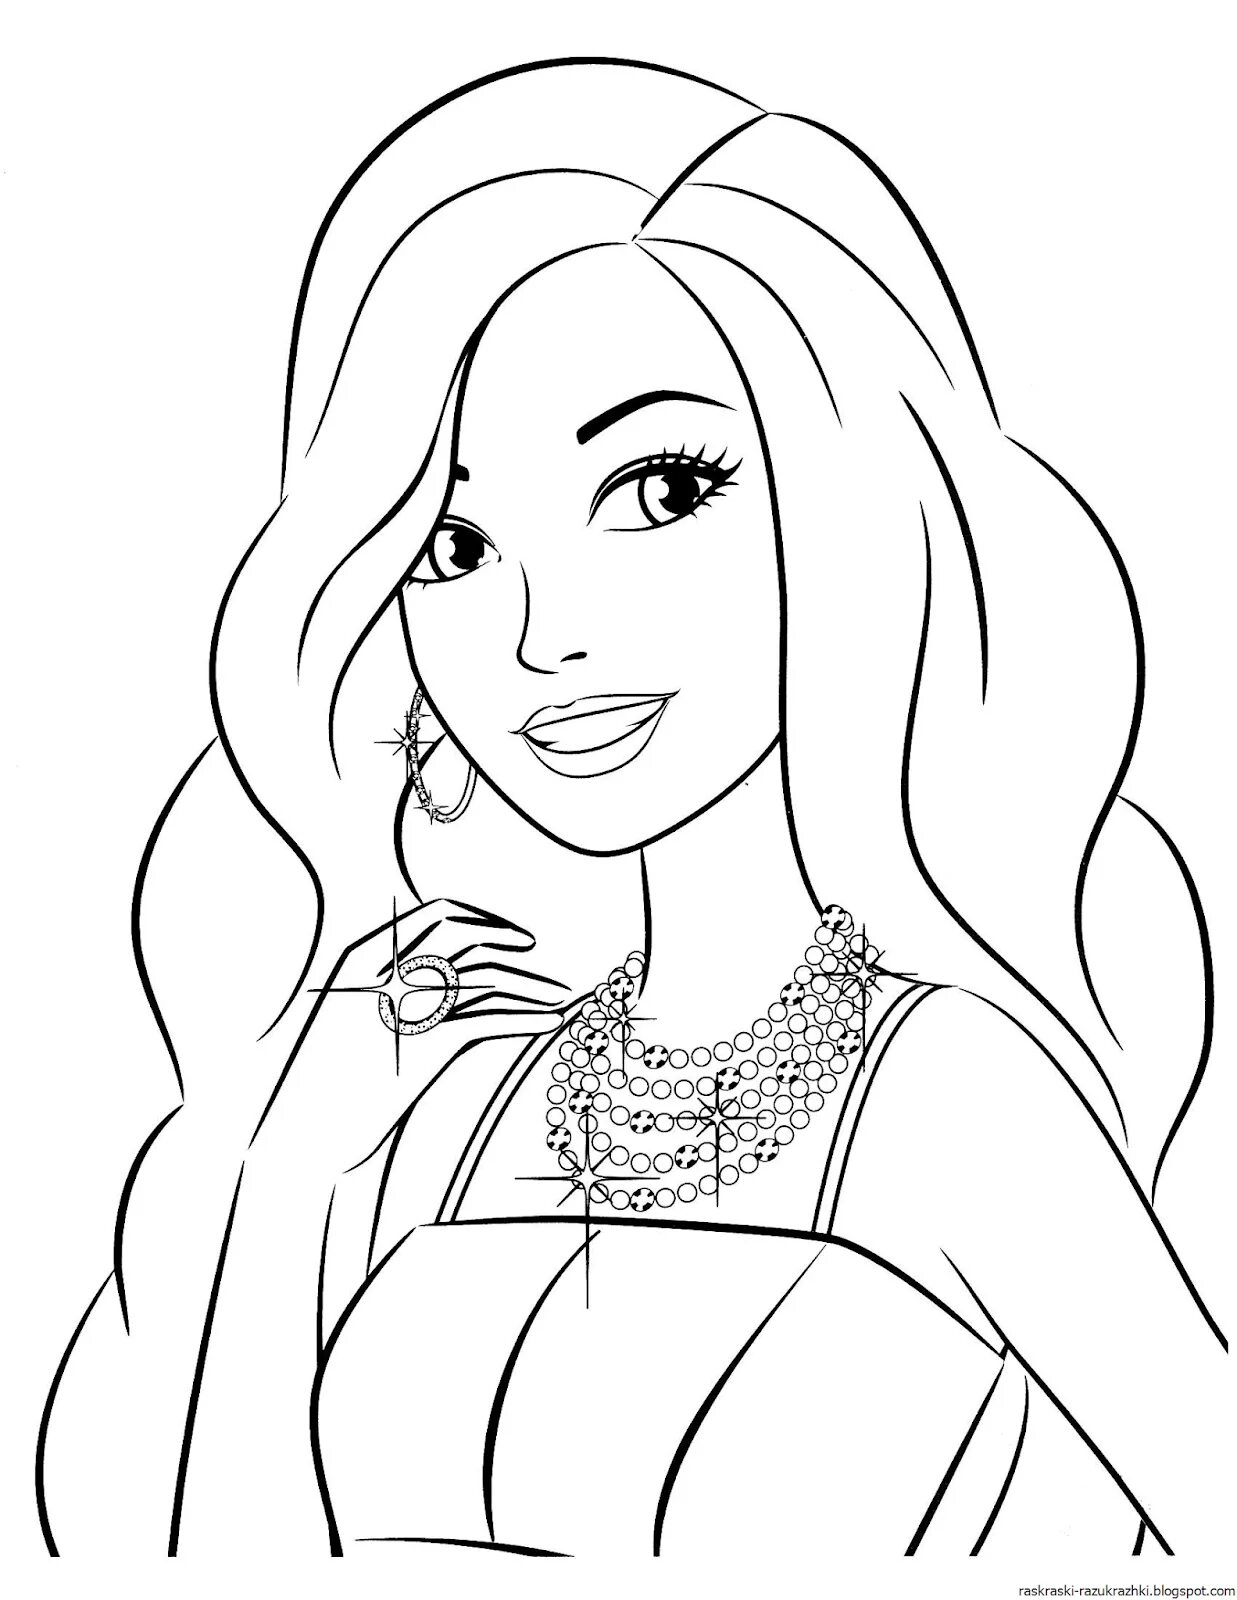 Color-explosion coloring page for girls all